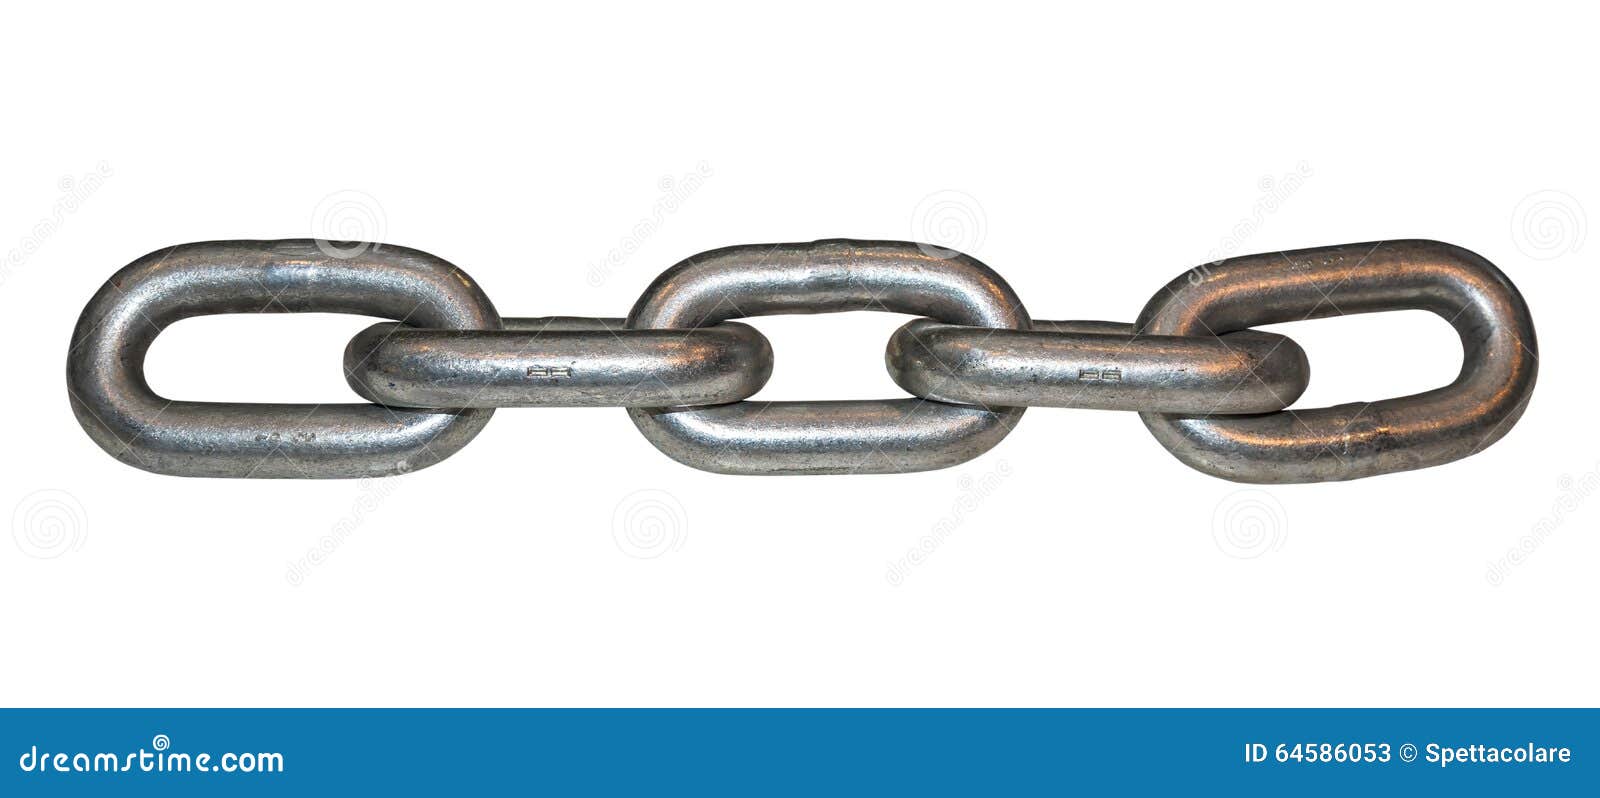 26,544 Metal Chain Link Stock Photos - Free & Royalty-Free Stock Photos  from Dreamstime